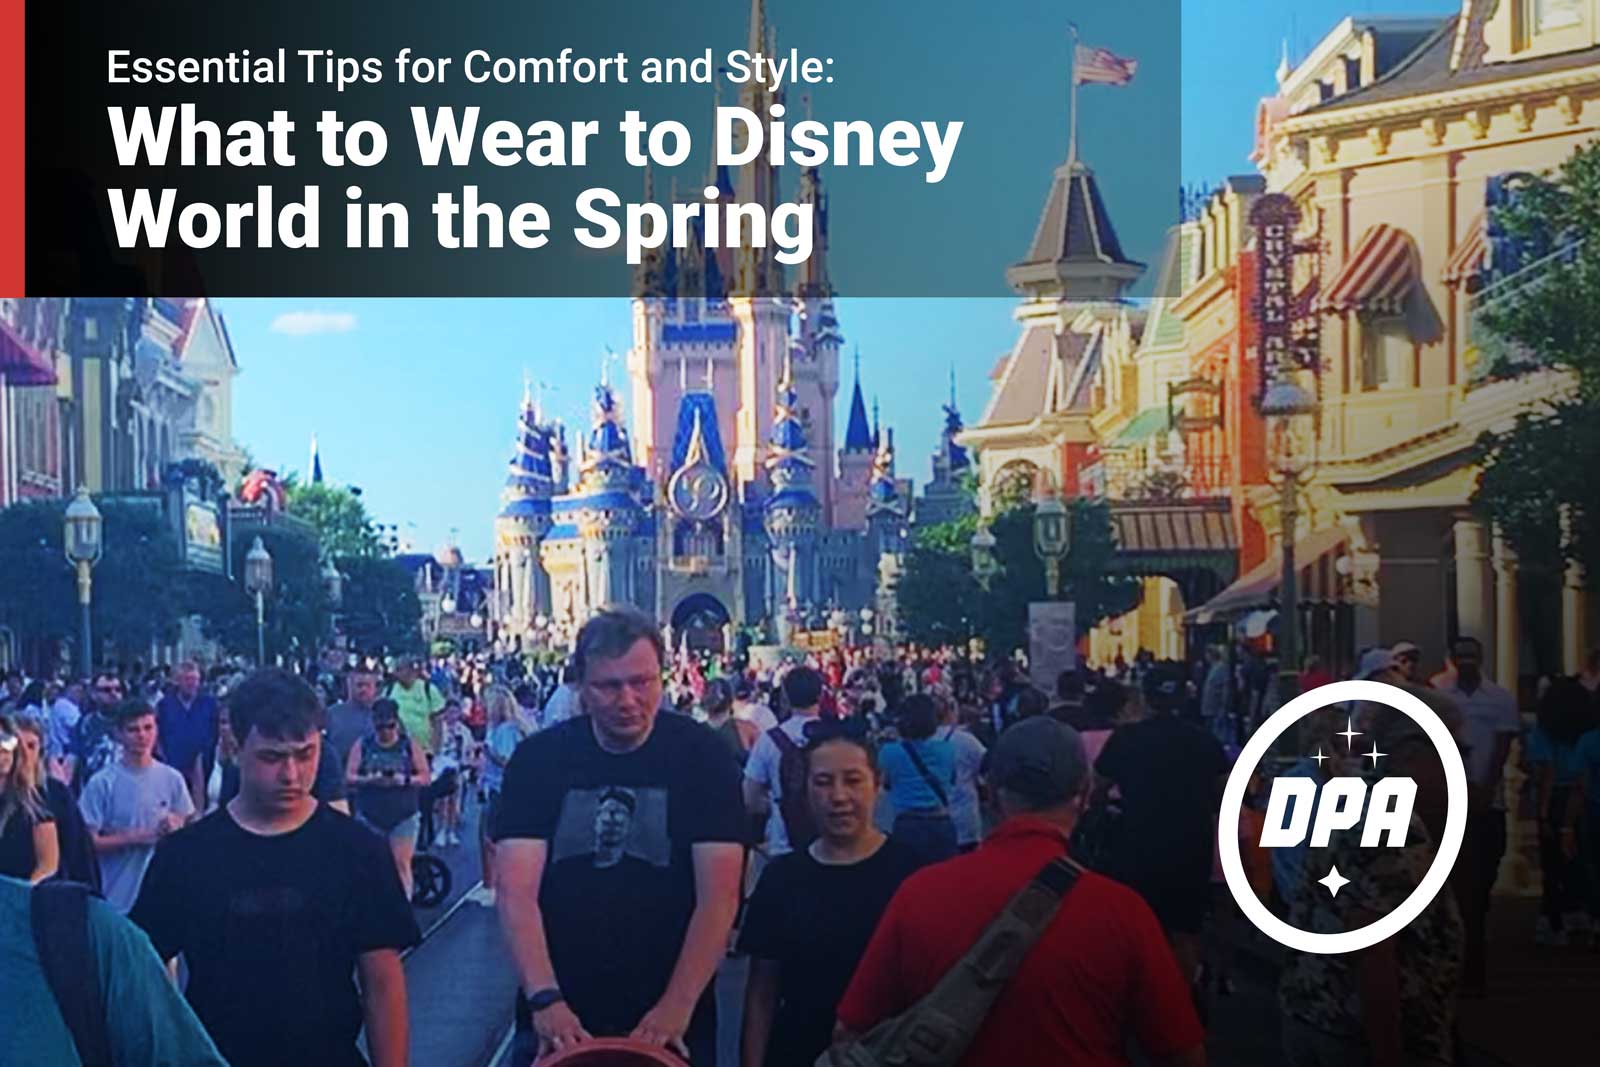 What to wear to Disney World in the Spring